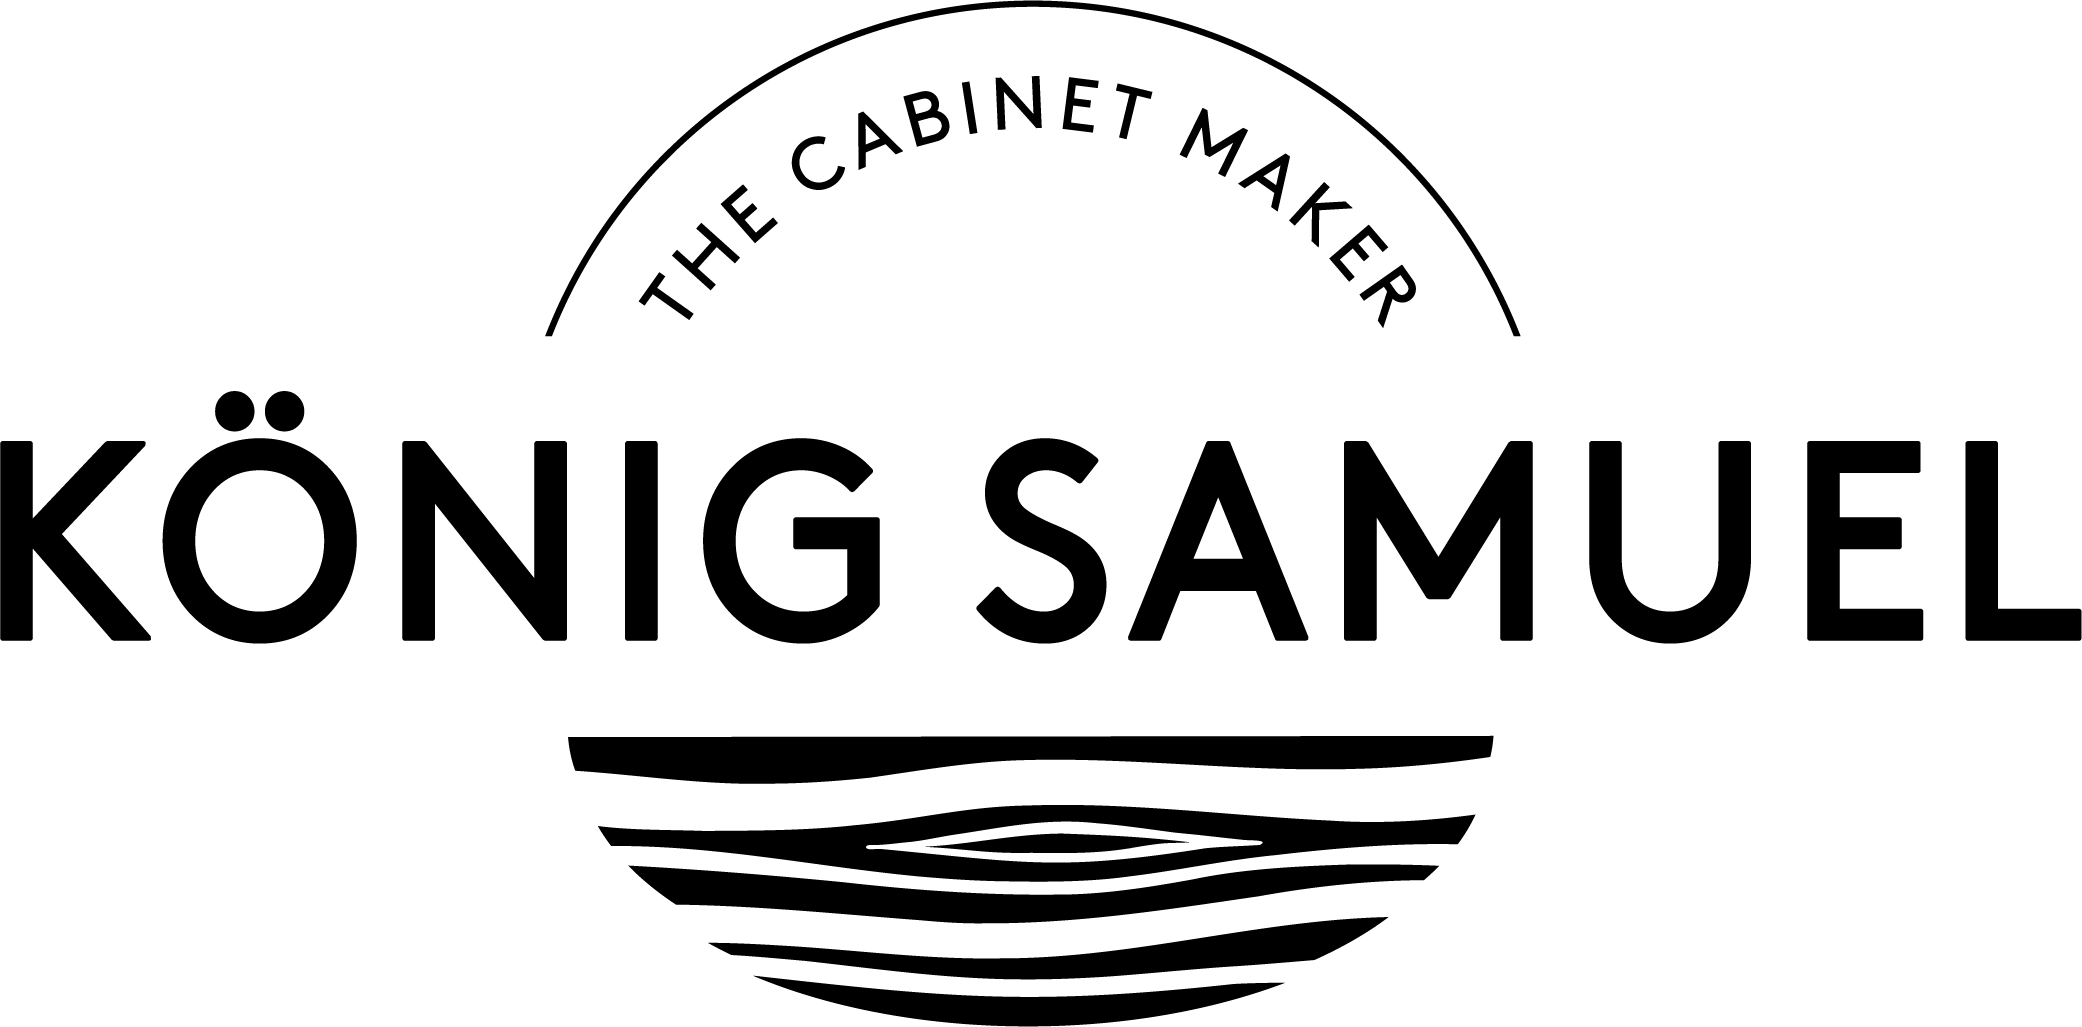 The Cabinet Maker